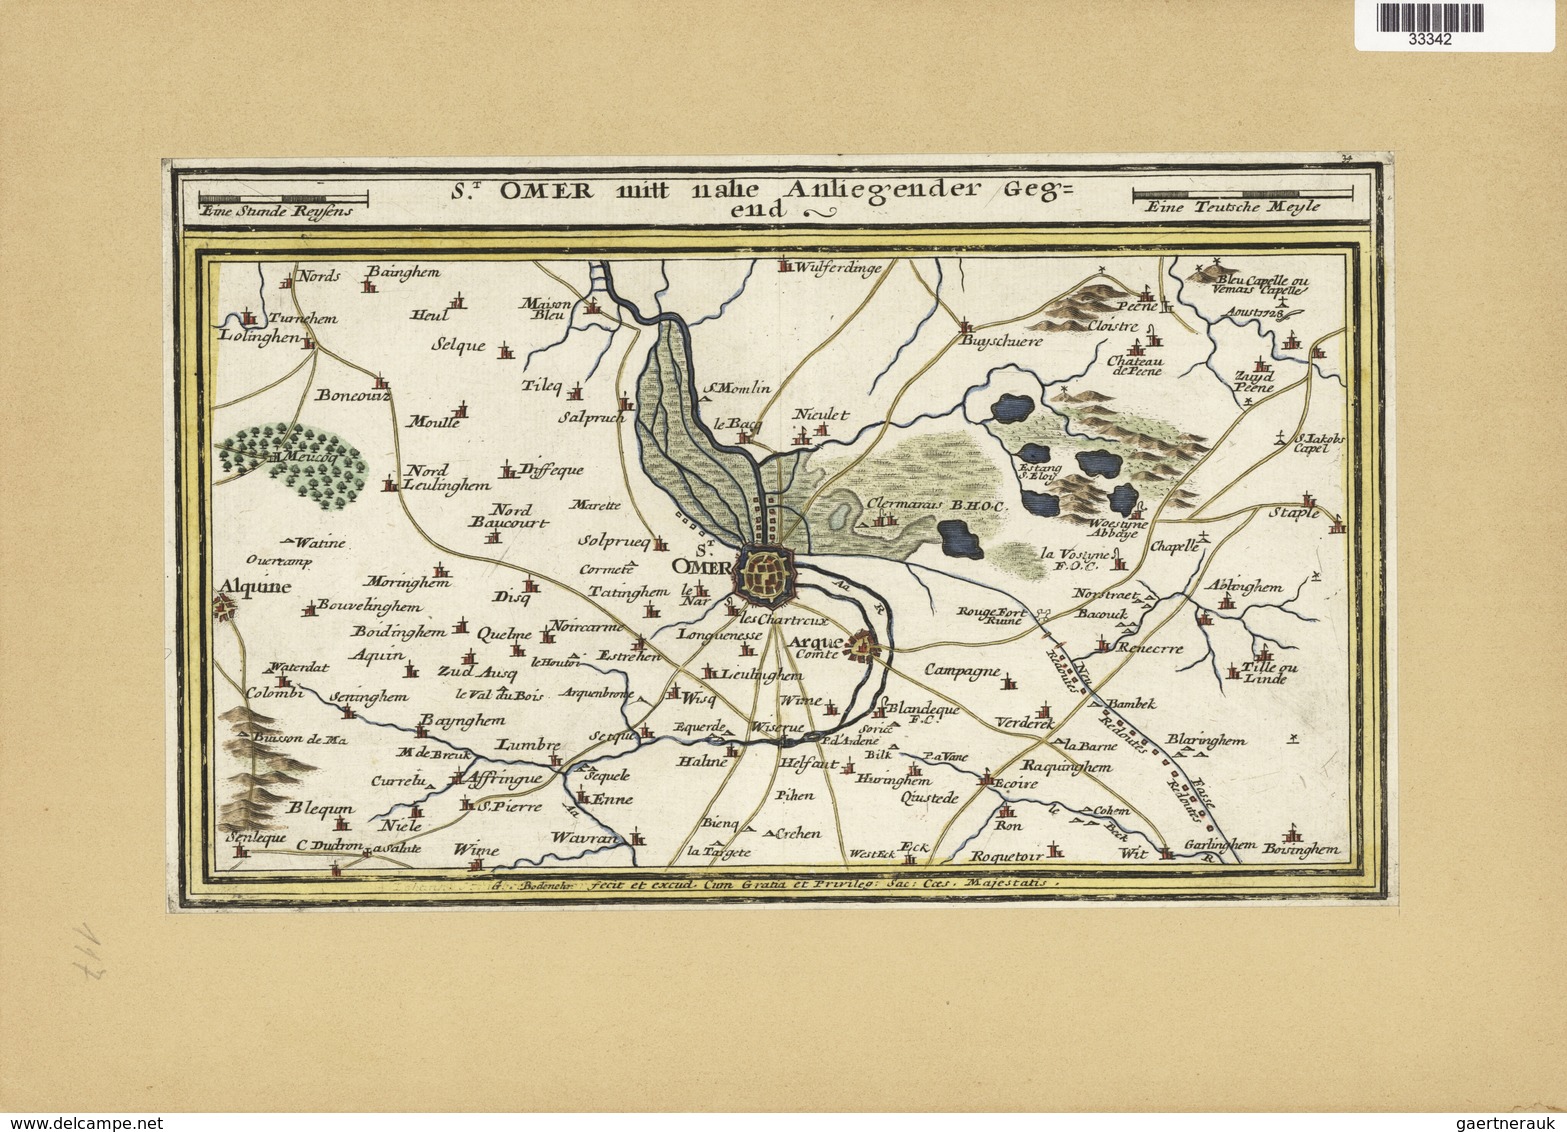 Landkarten Und Stiche: 1720. Hand-colored Map Of St Omer In The Calais Region Of France By Gabriel B - Geography